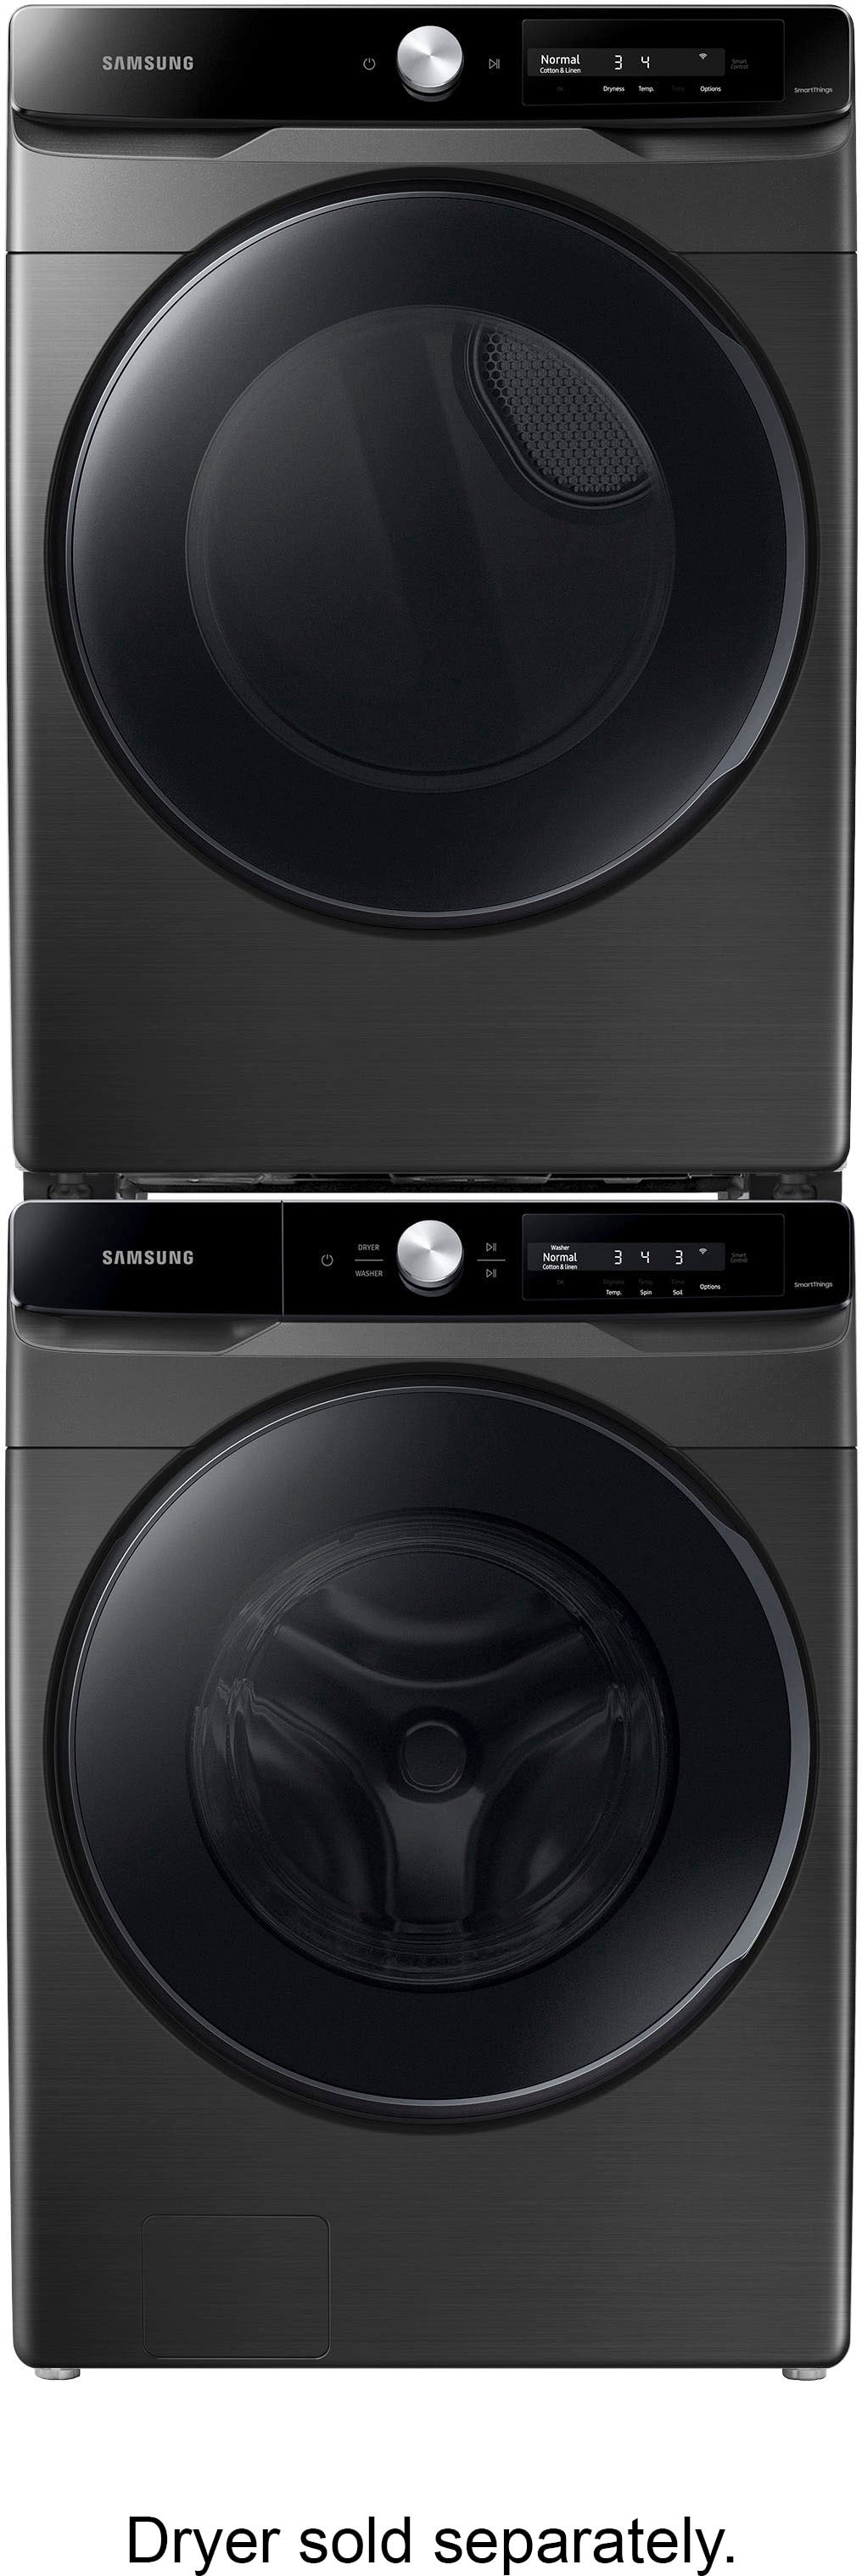 Samsung - 4.5 cu. ft. Large Capacity Smart Dial Front Load Washer with Super Speed Wash - Brushed black_2